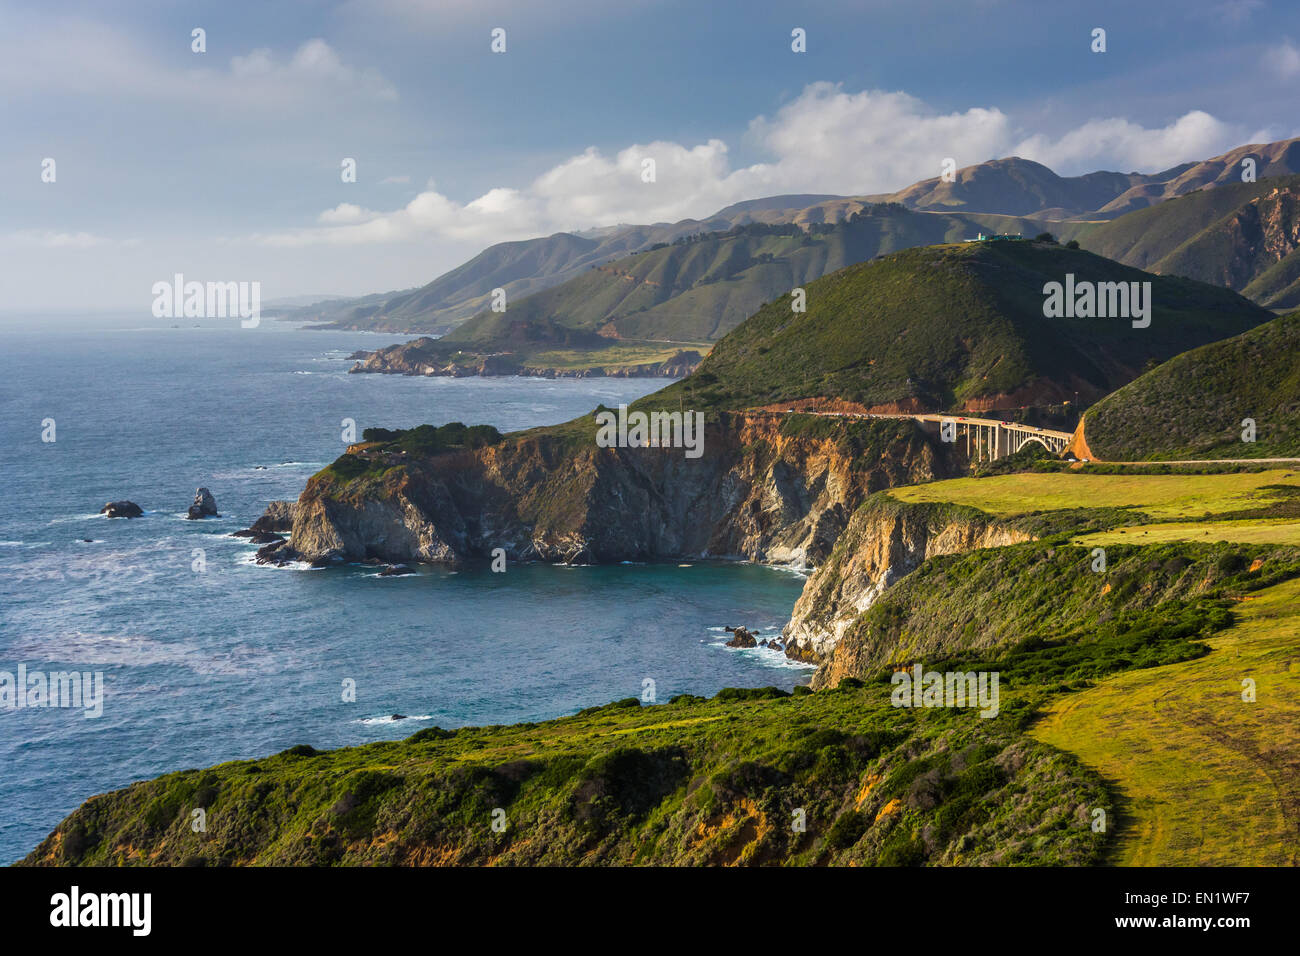 View of Bixby Creek Bridge and mountains along the Pacific Coast, in Big Sur, California. Stock Photo